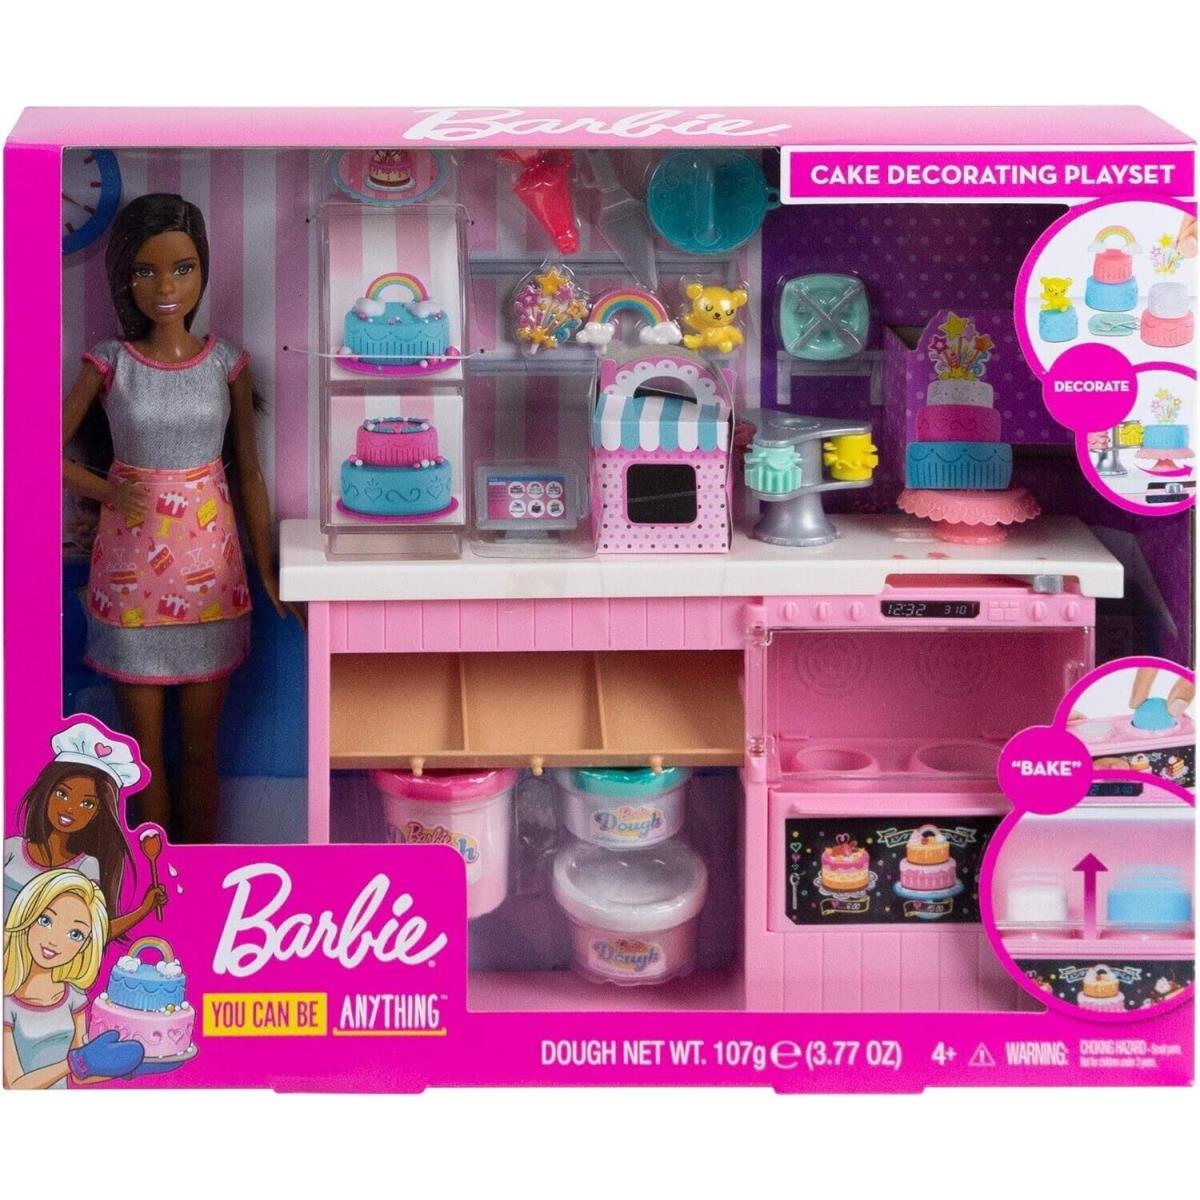 Barbie Cake Decorating Playset with Brunette Doll Baking Island with Oven